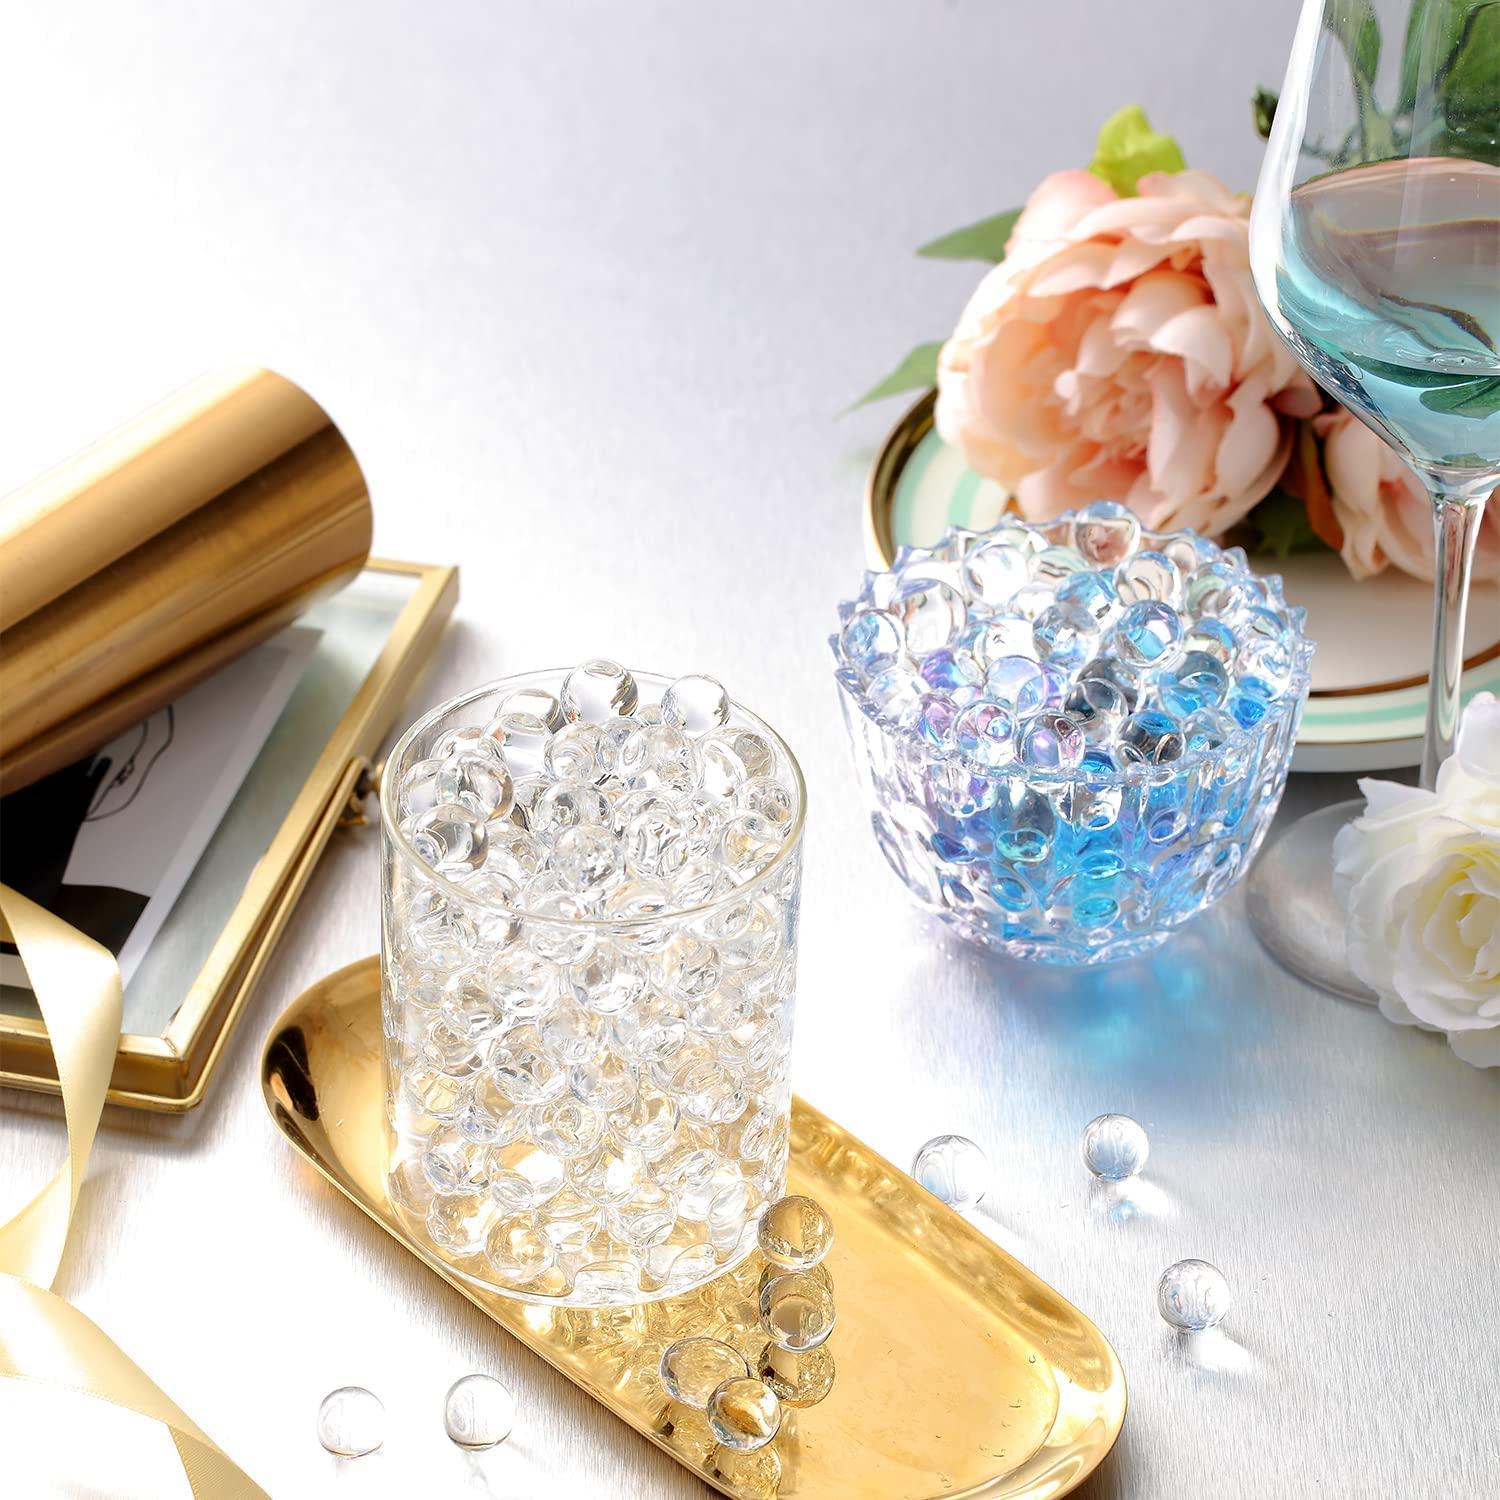 Water Beads Ideas - Centerpieces, Vases and other water bead ideas